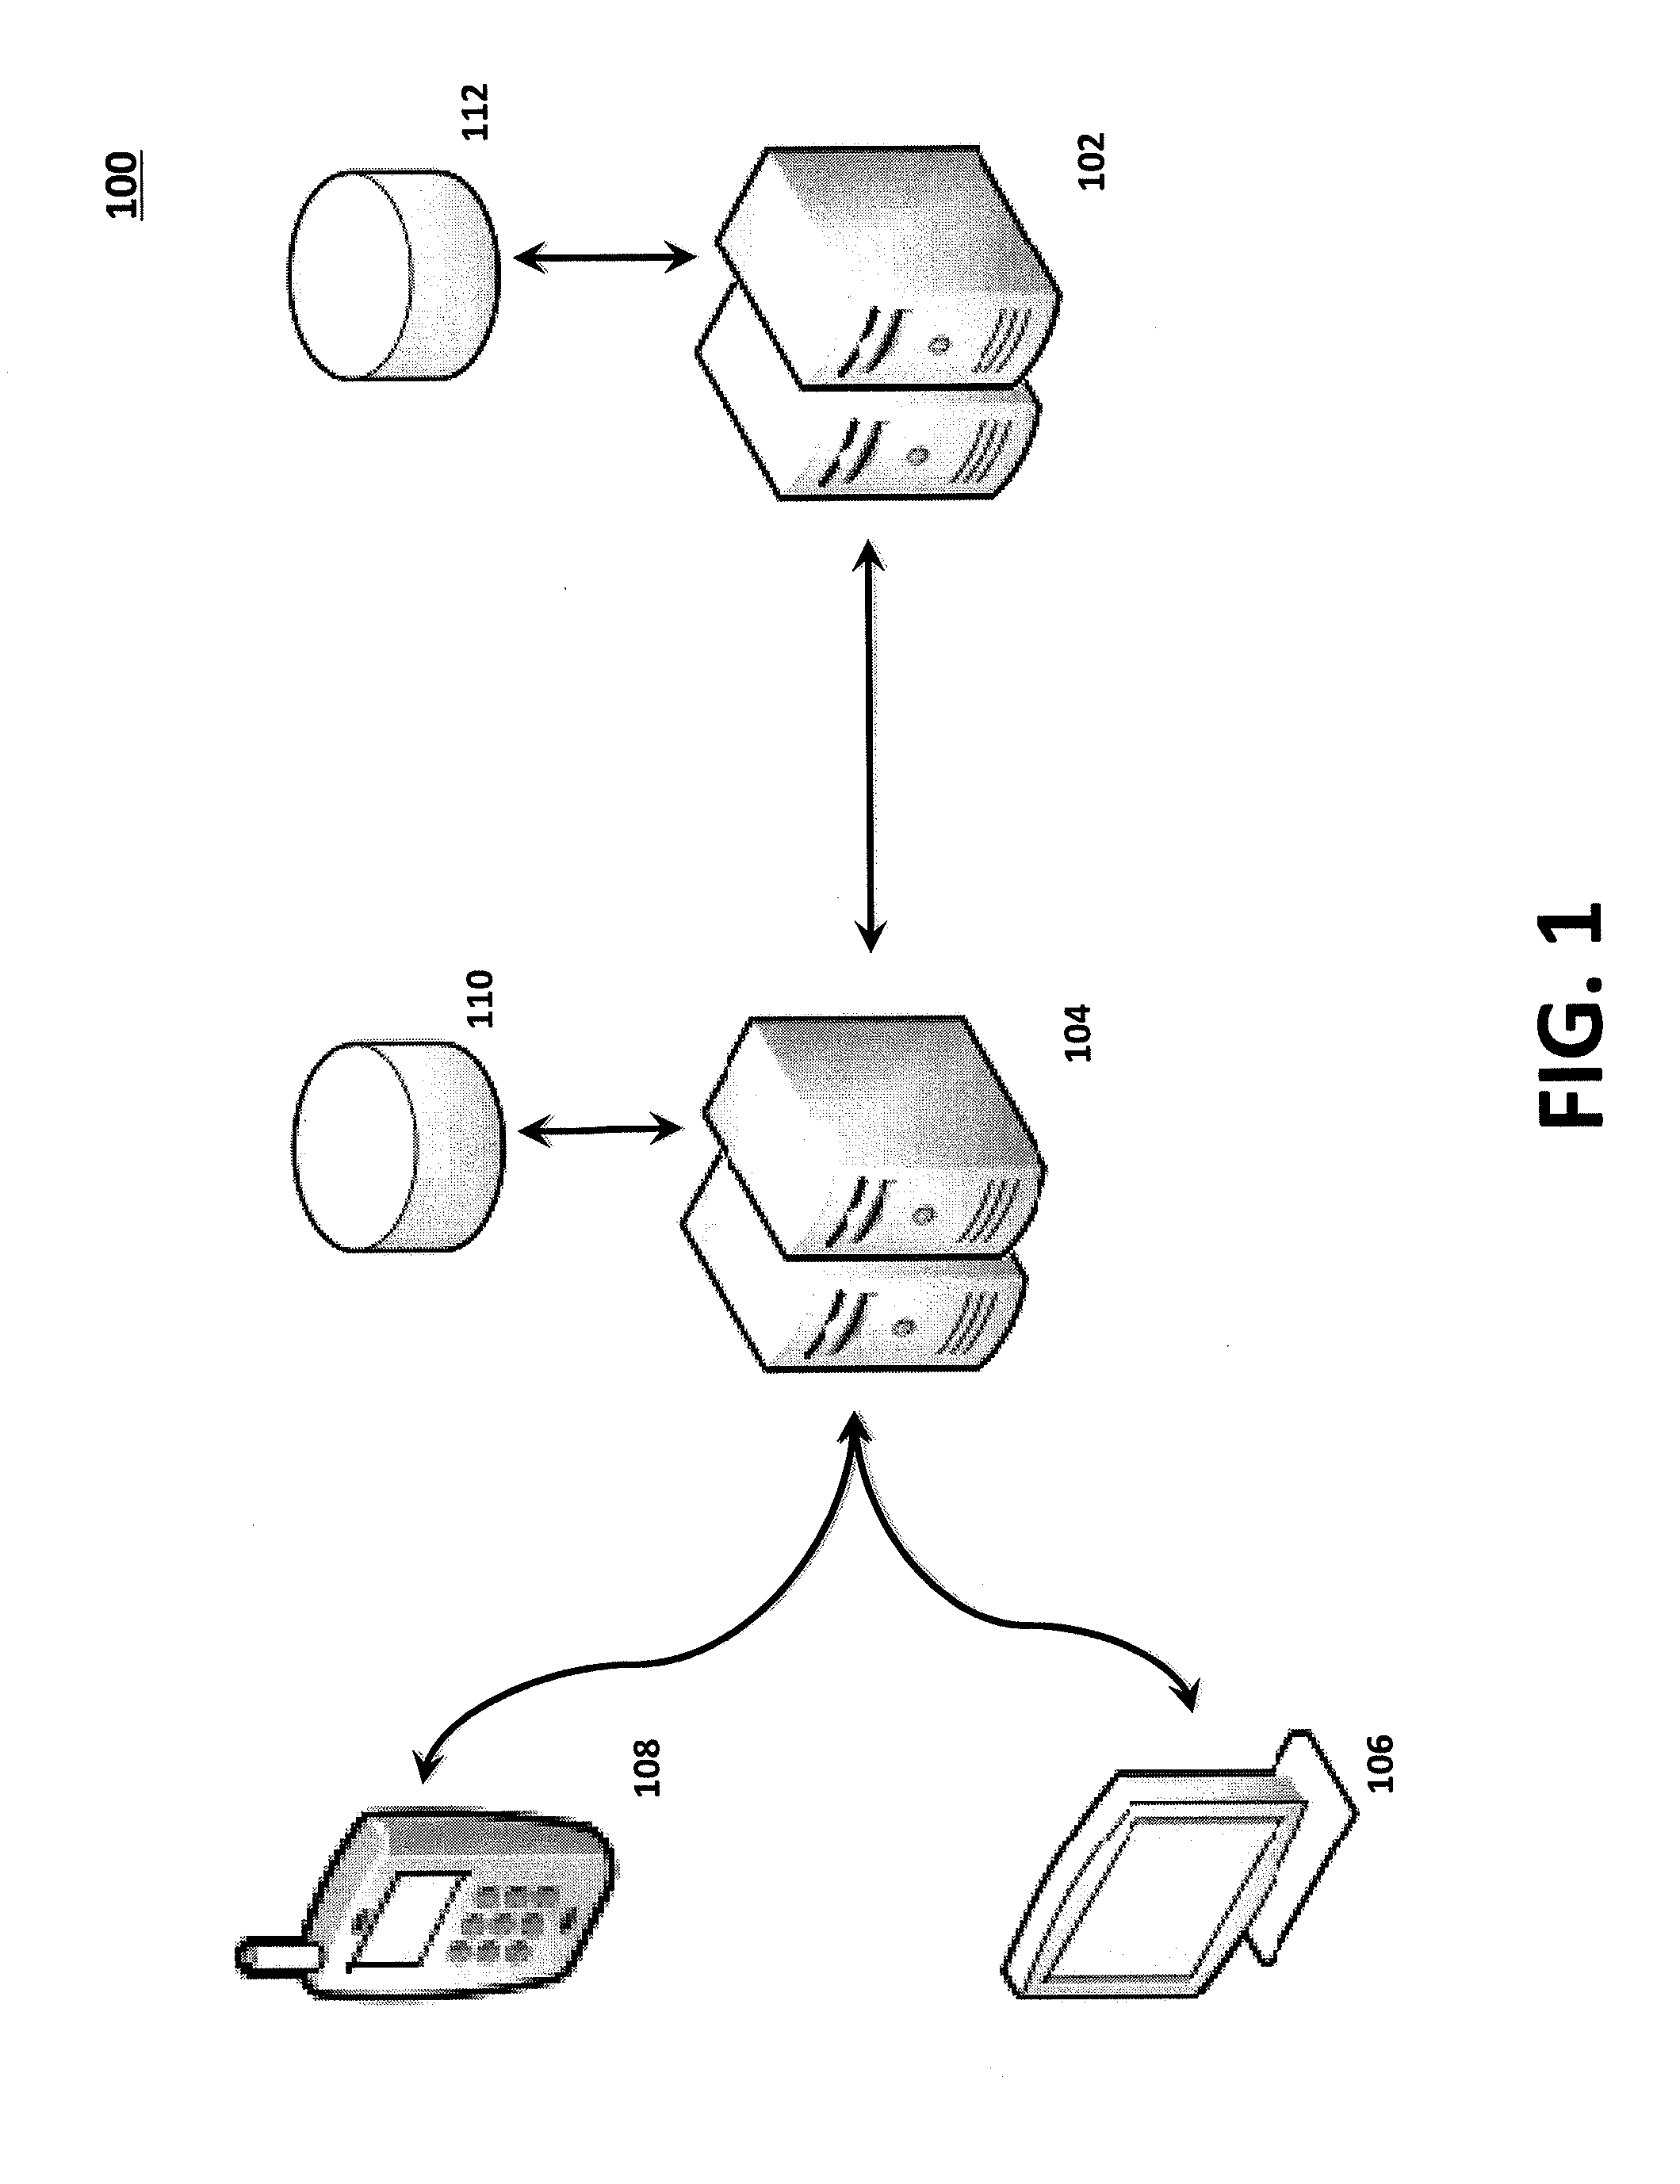 Zero-latency risk-management system and method